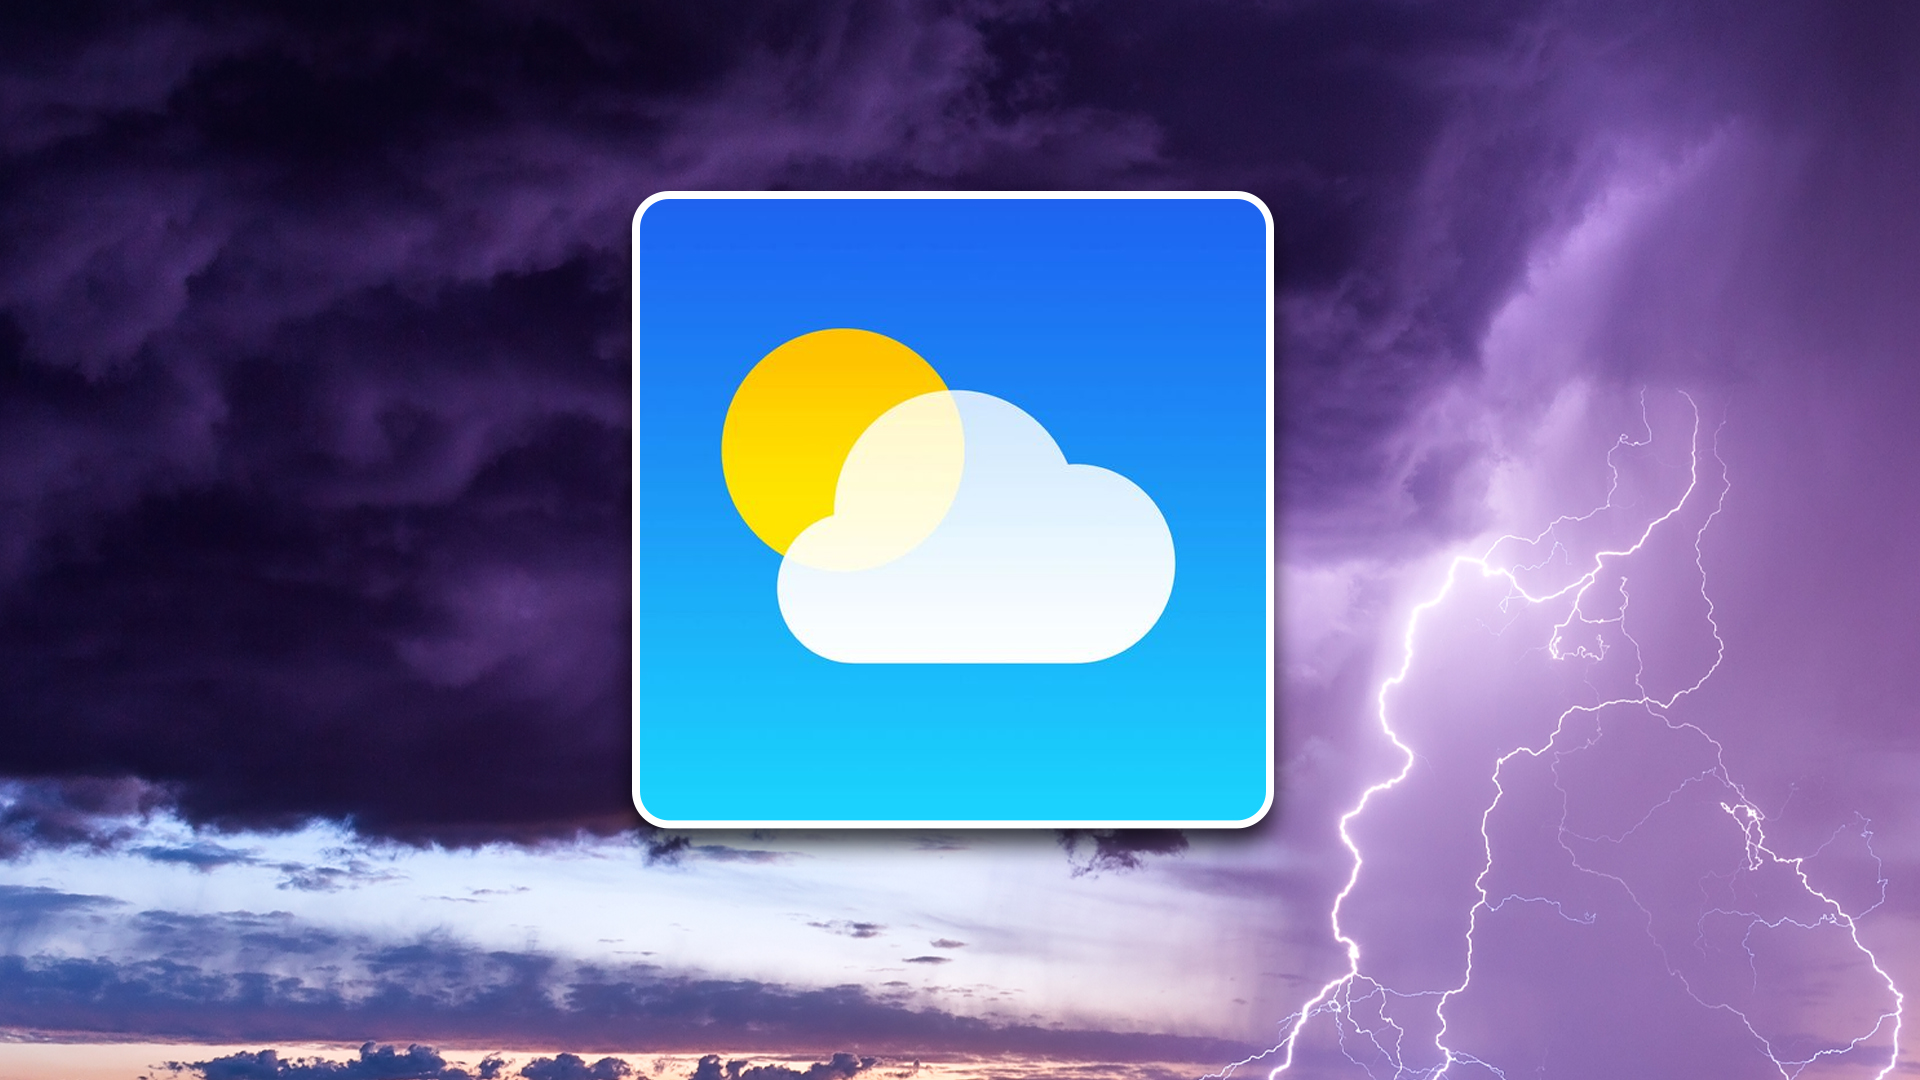 Hidden iPhone weather map prevents rain ruining plans – here's how to find it